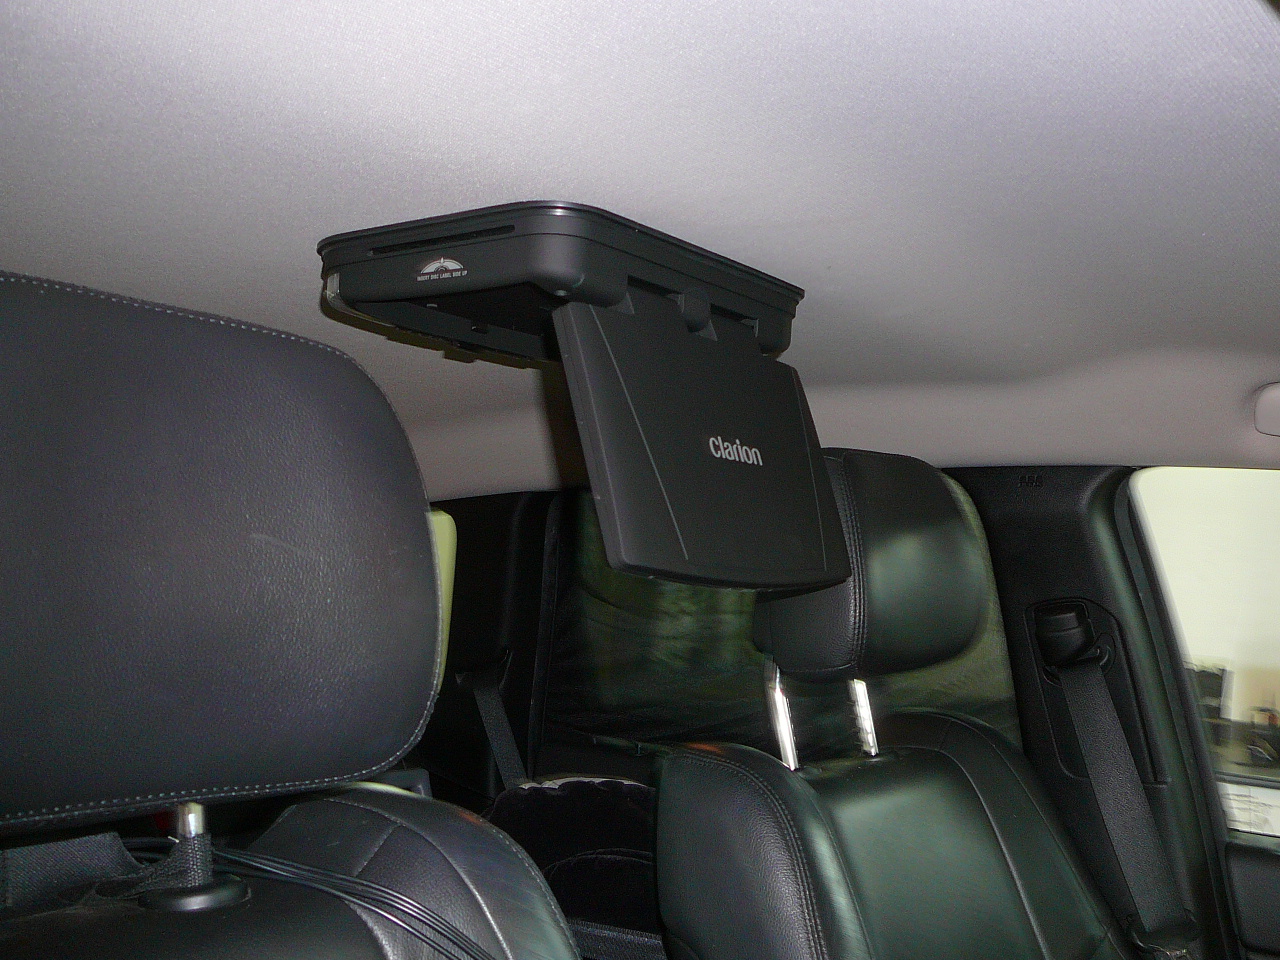 Jeep Grand Cherokee, Clarion DVD Roof Screen VTM1